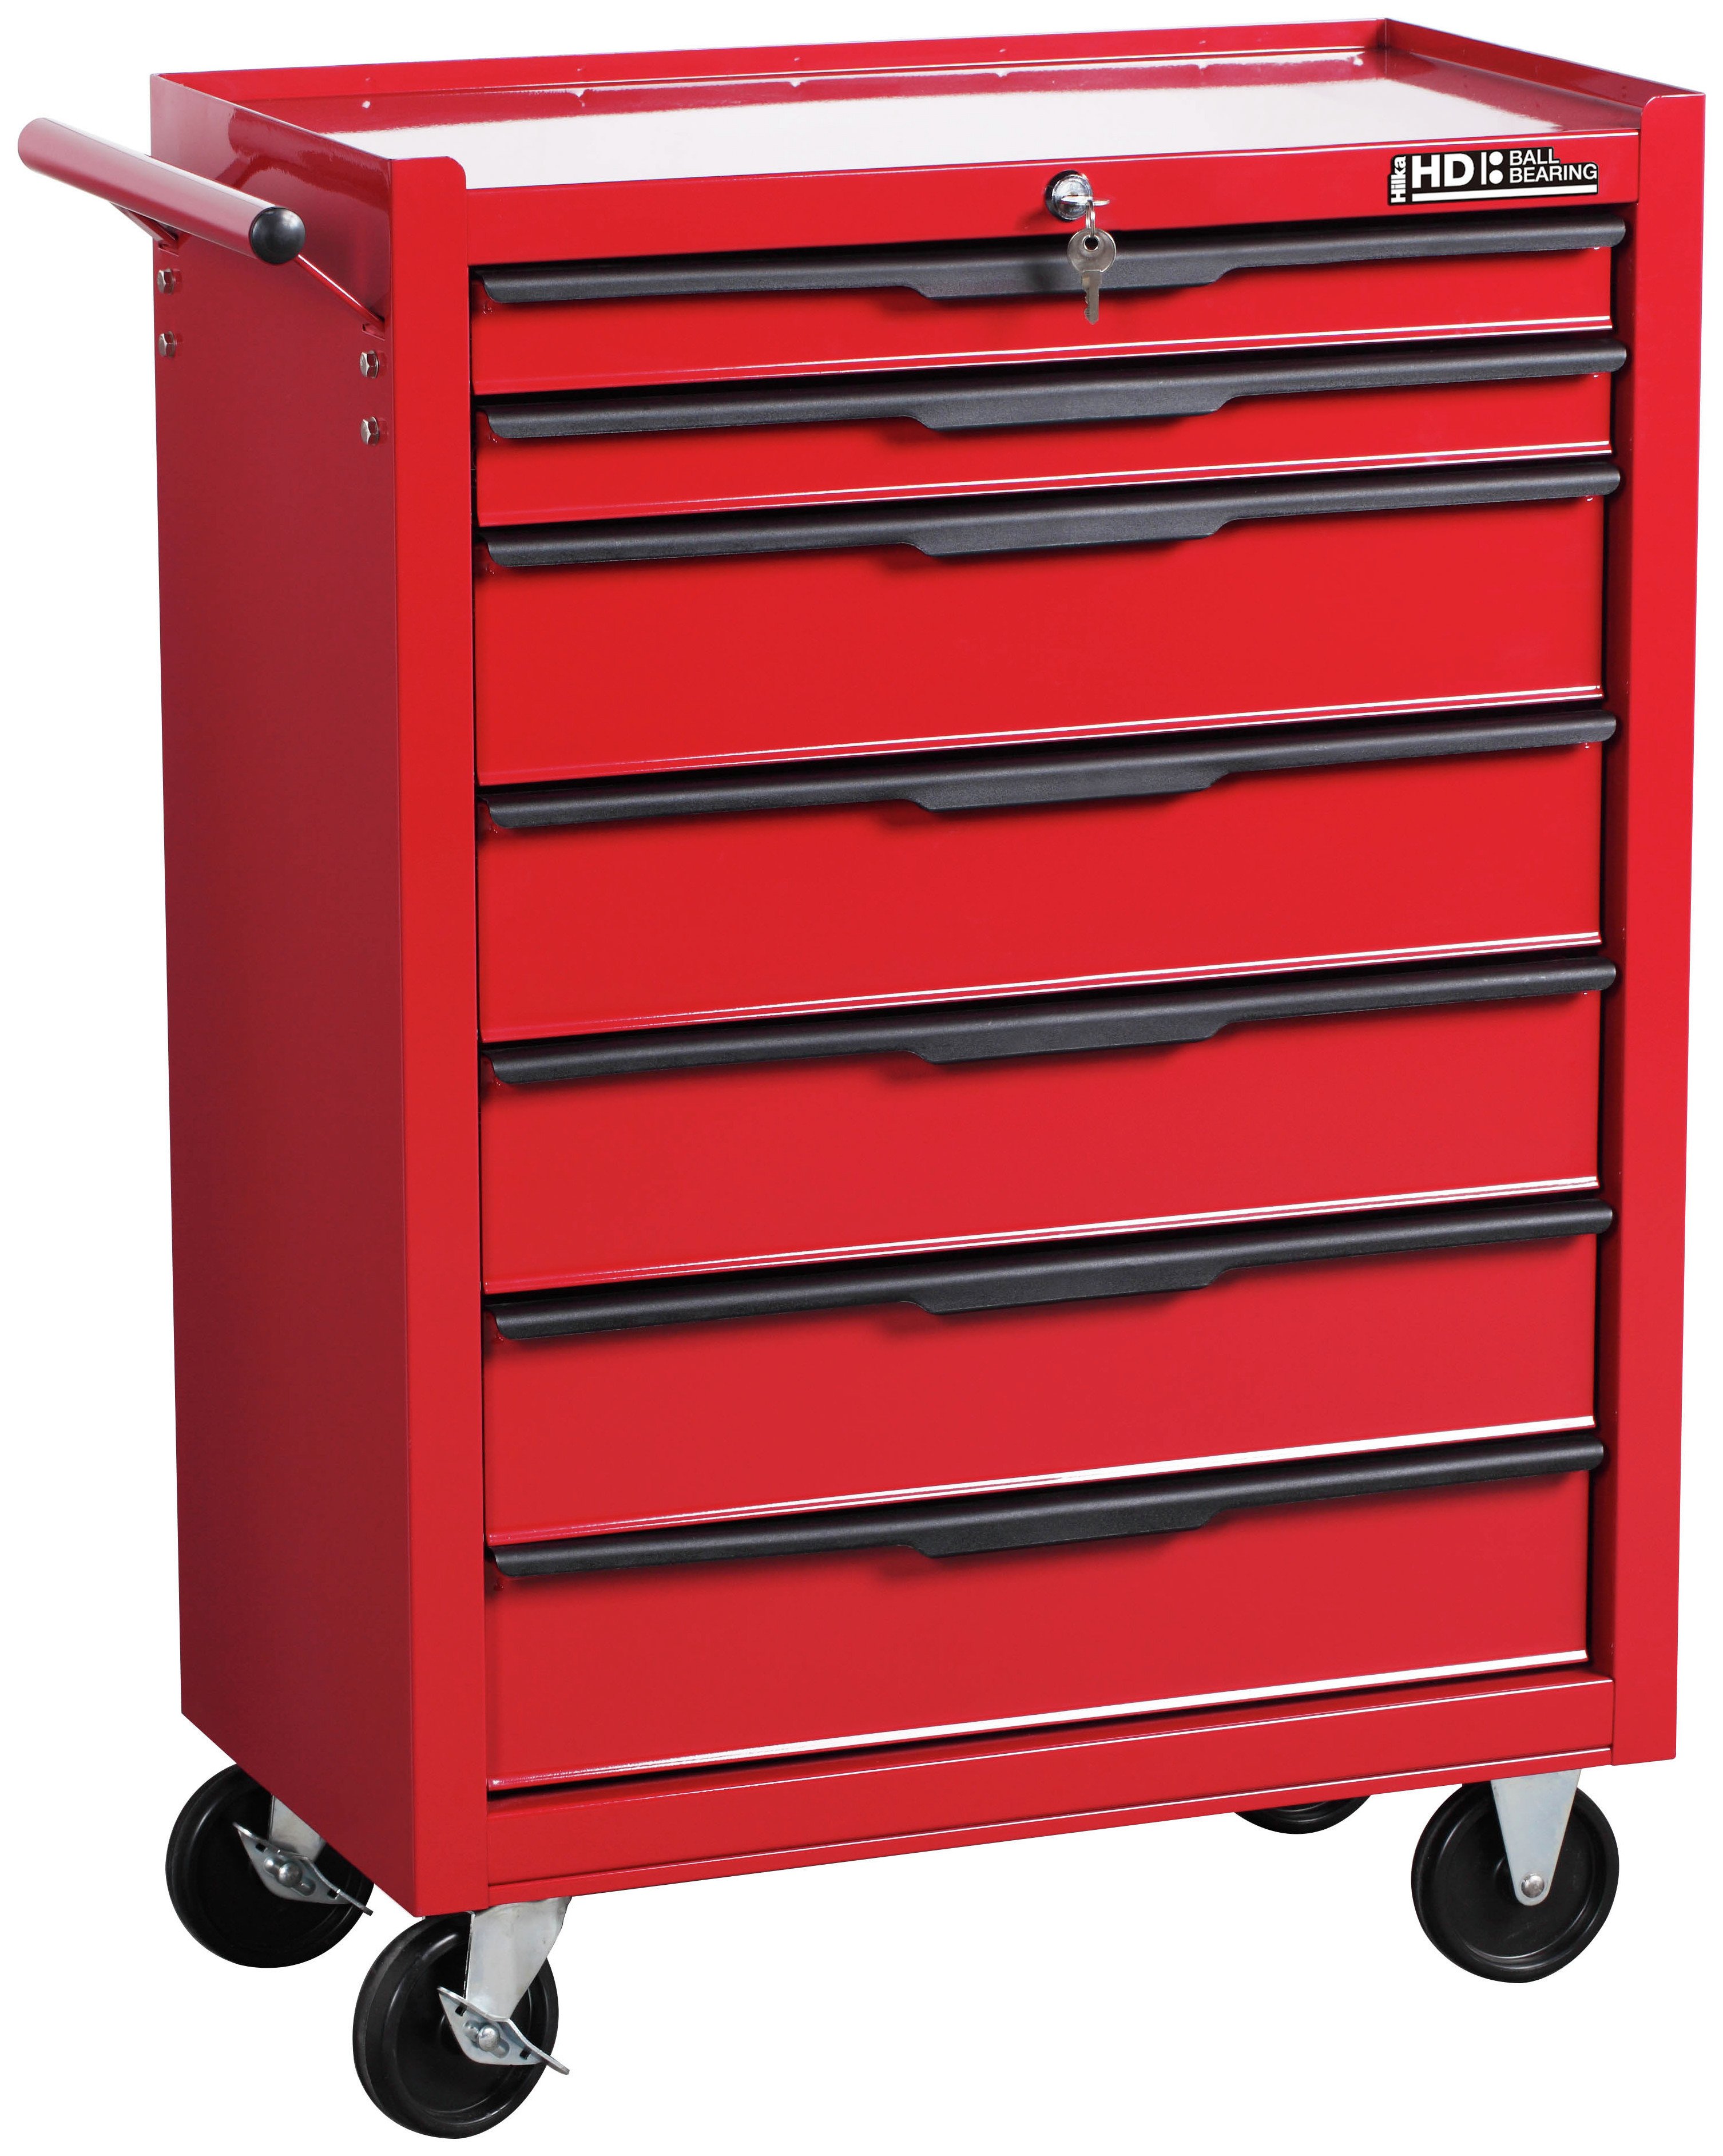 7 Drawer Mobile Tool Trolley.